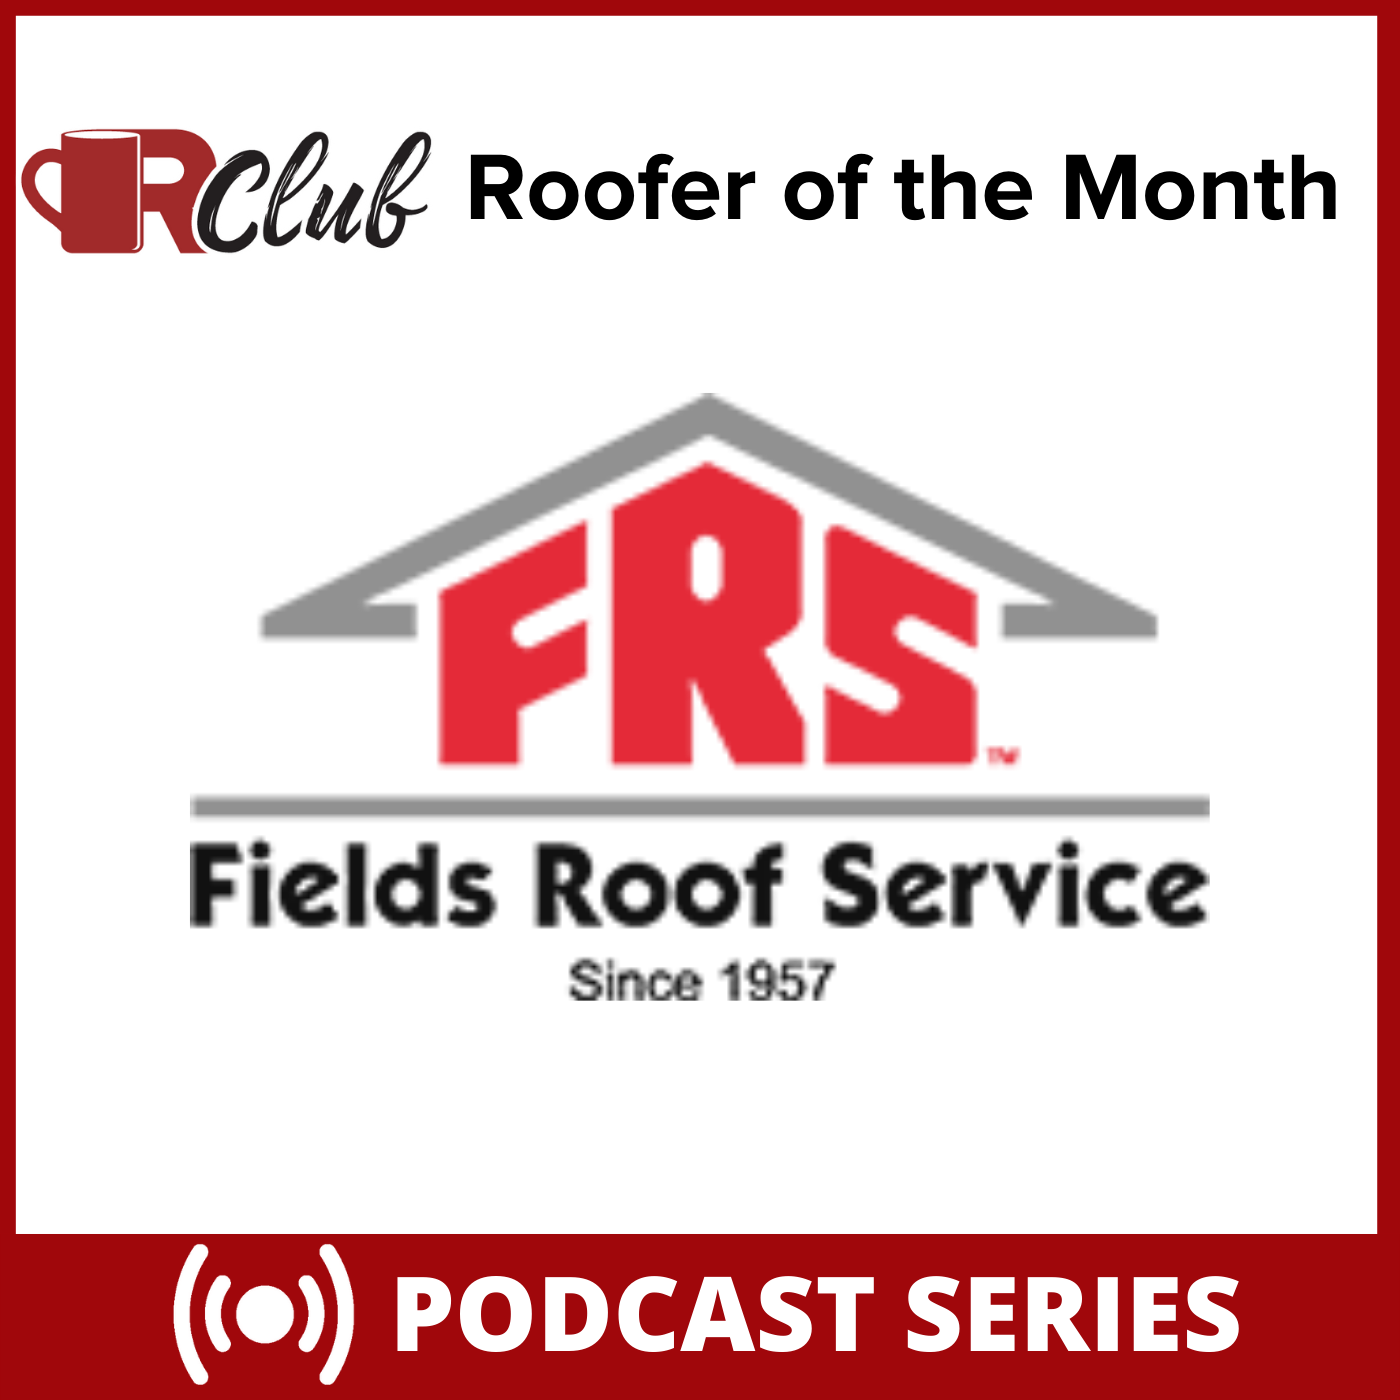 ROTM - Fields Roof Service